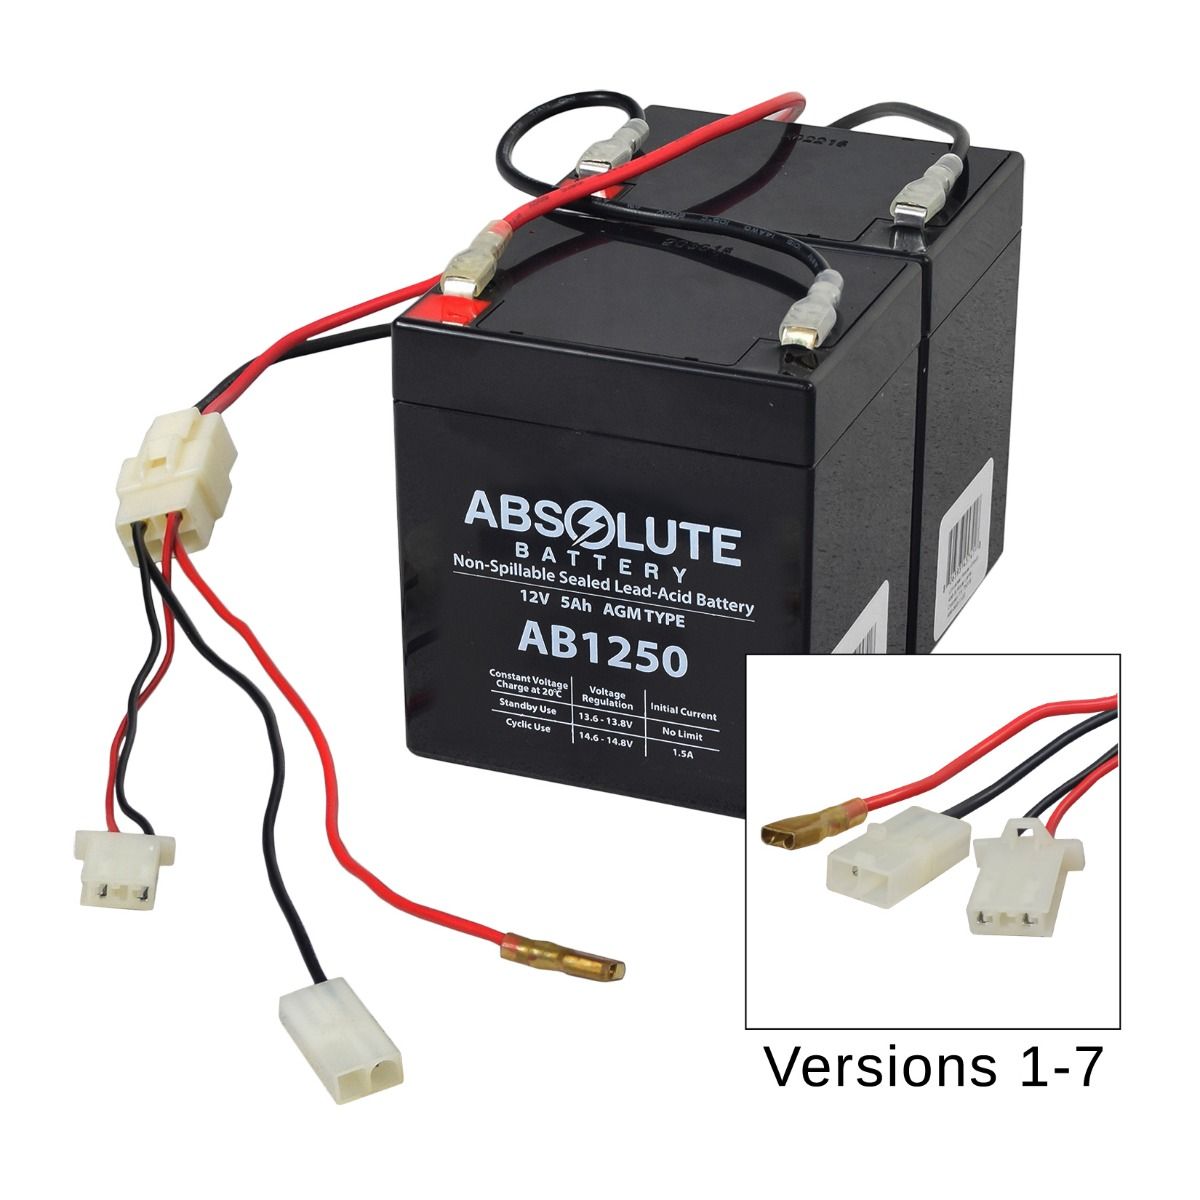 AlveyTech 24 Volt Battery Pack (Versions 1-7) - For the Razor E100, E100 Glow, E125 Electric Scooter - image 1 of 9